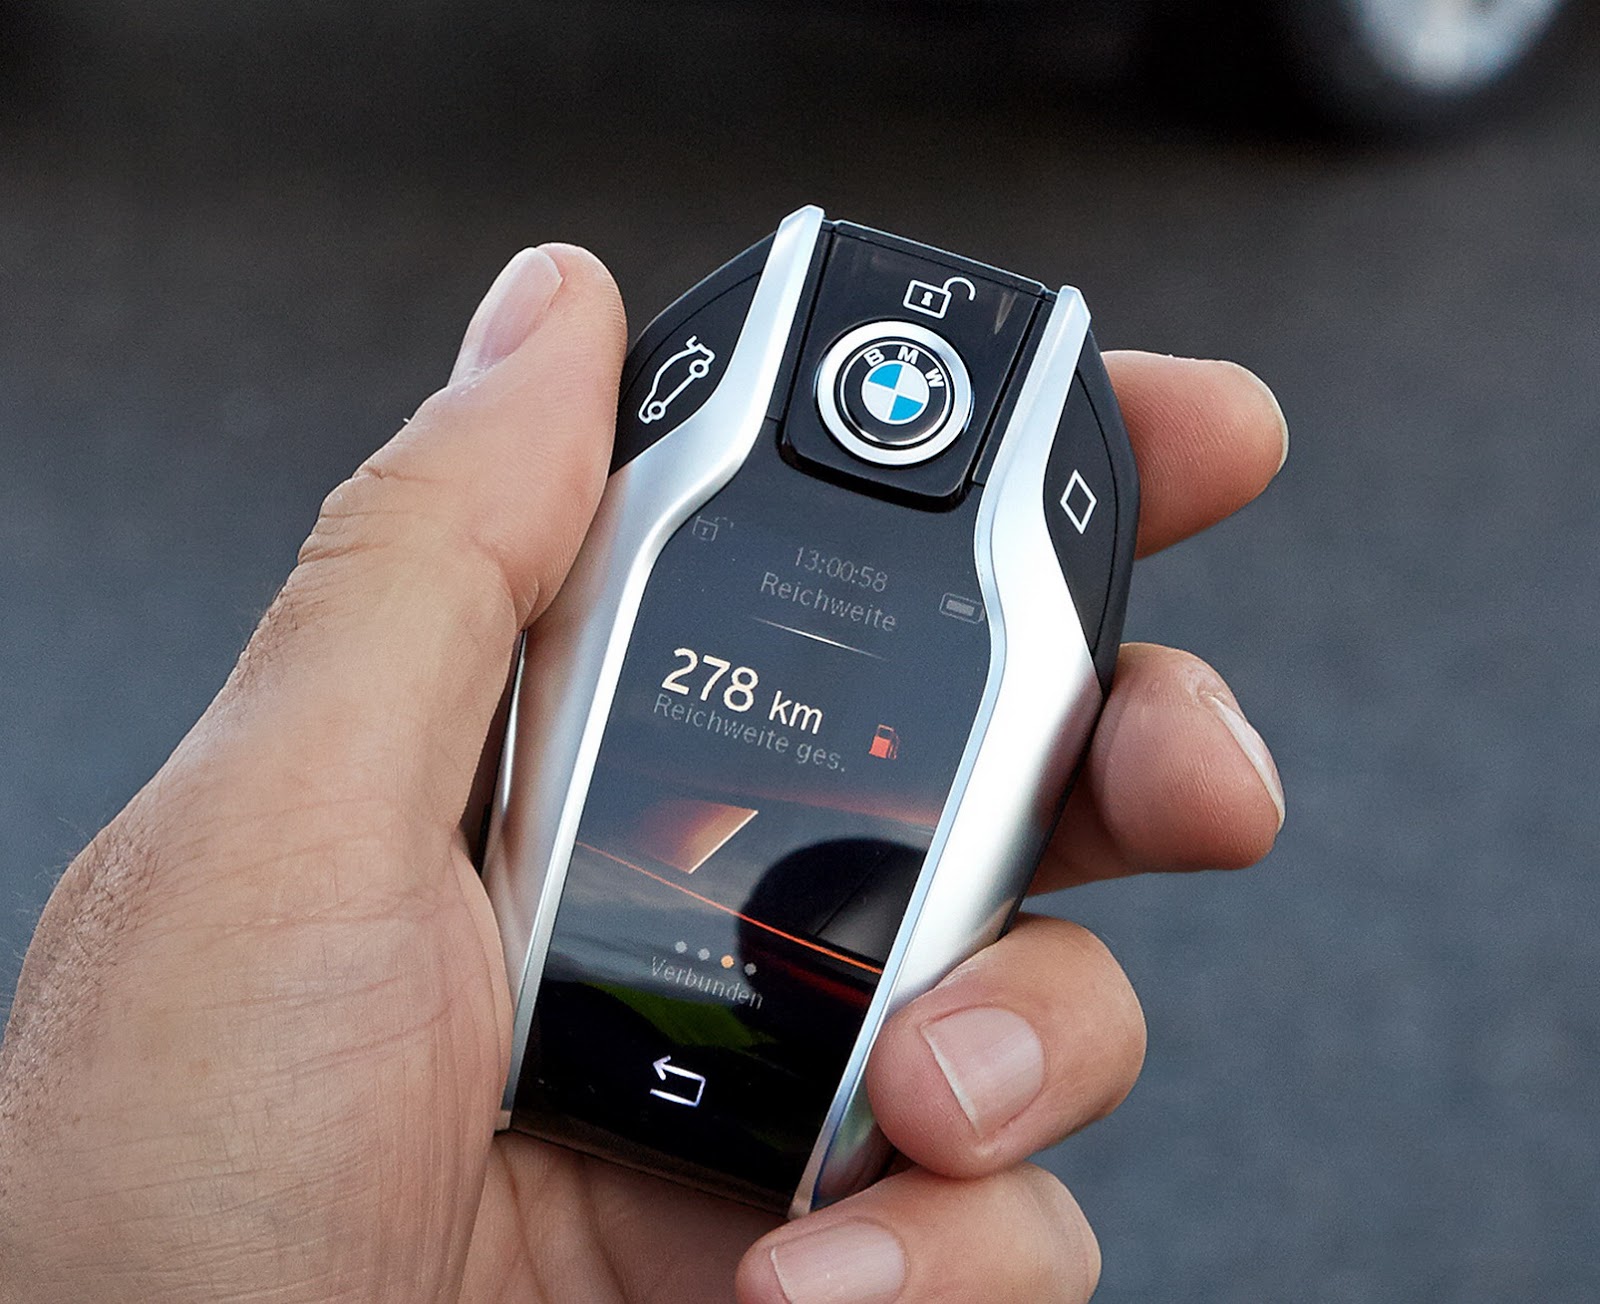 New BMW 7Series Has A Super Cool Key Fob With A Digital Display That